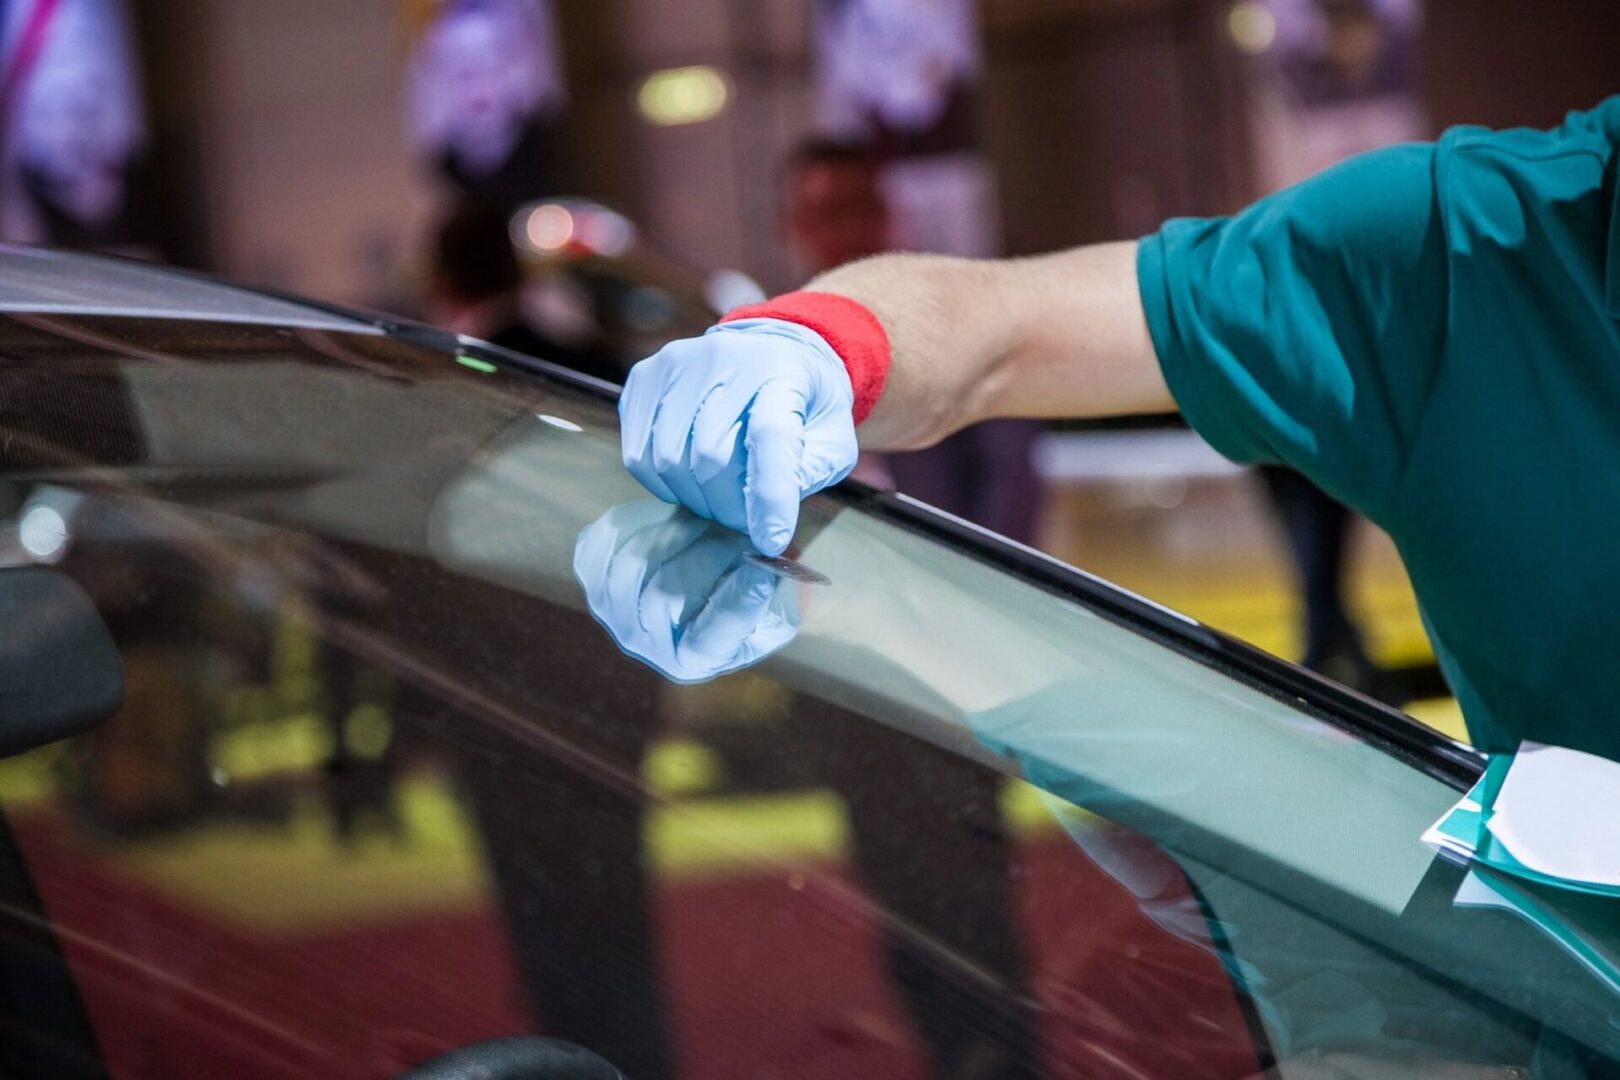 A person with gloves on working on a car.